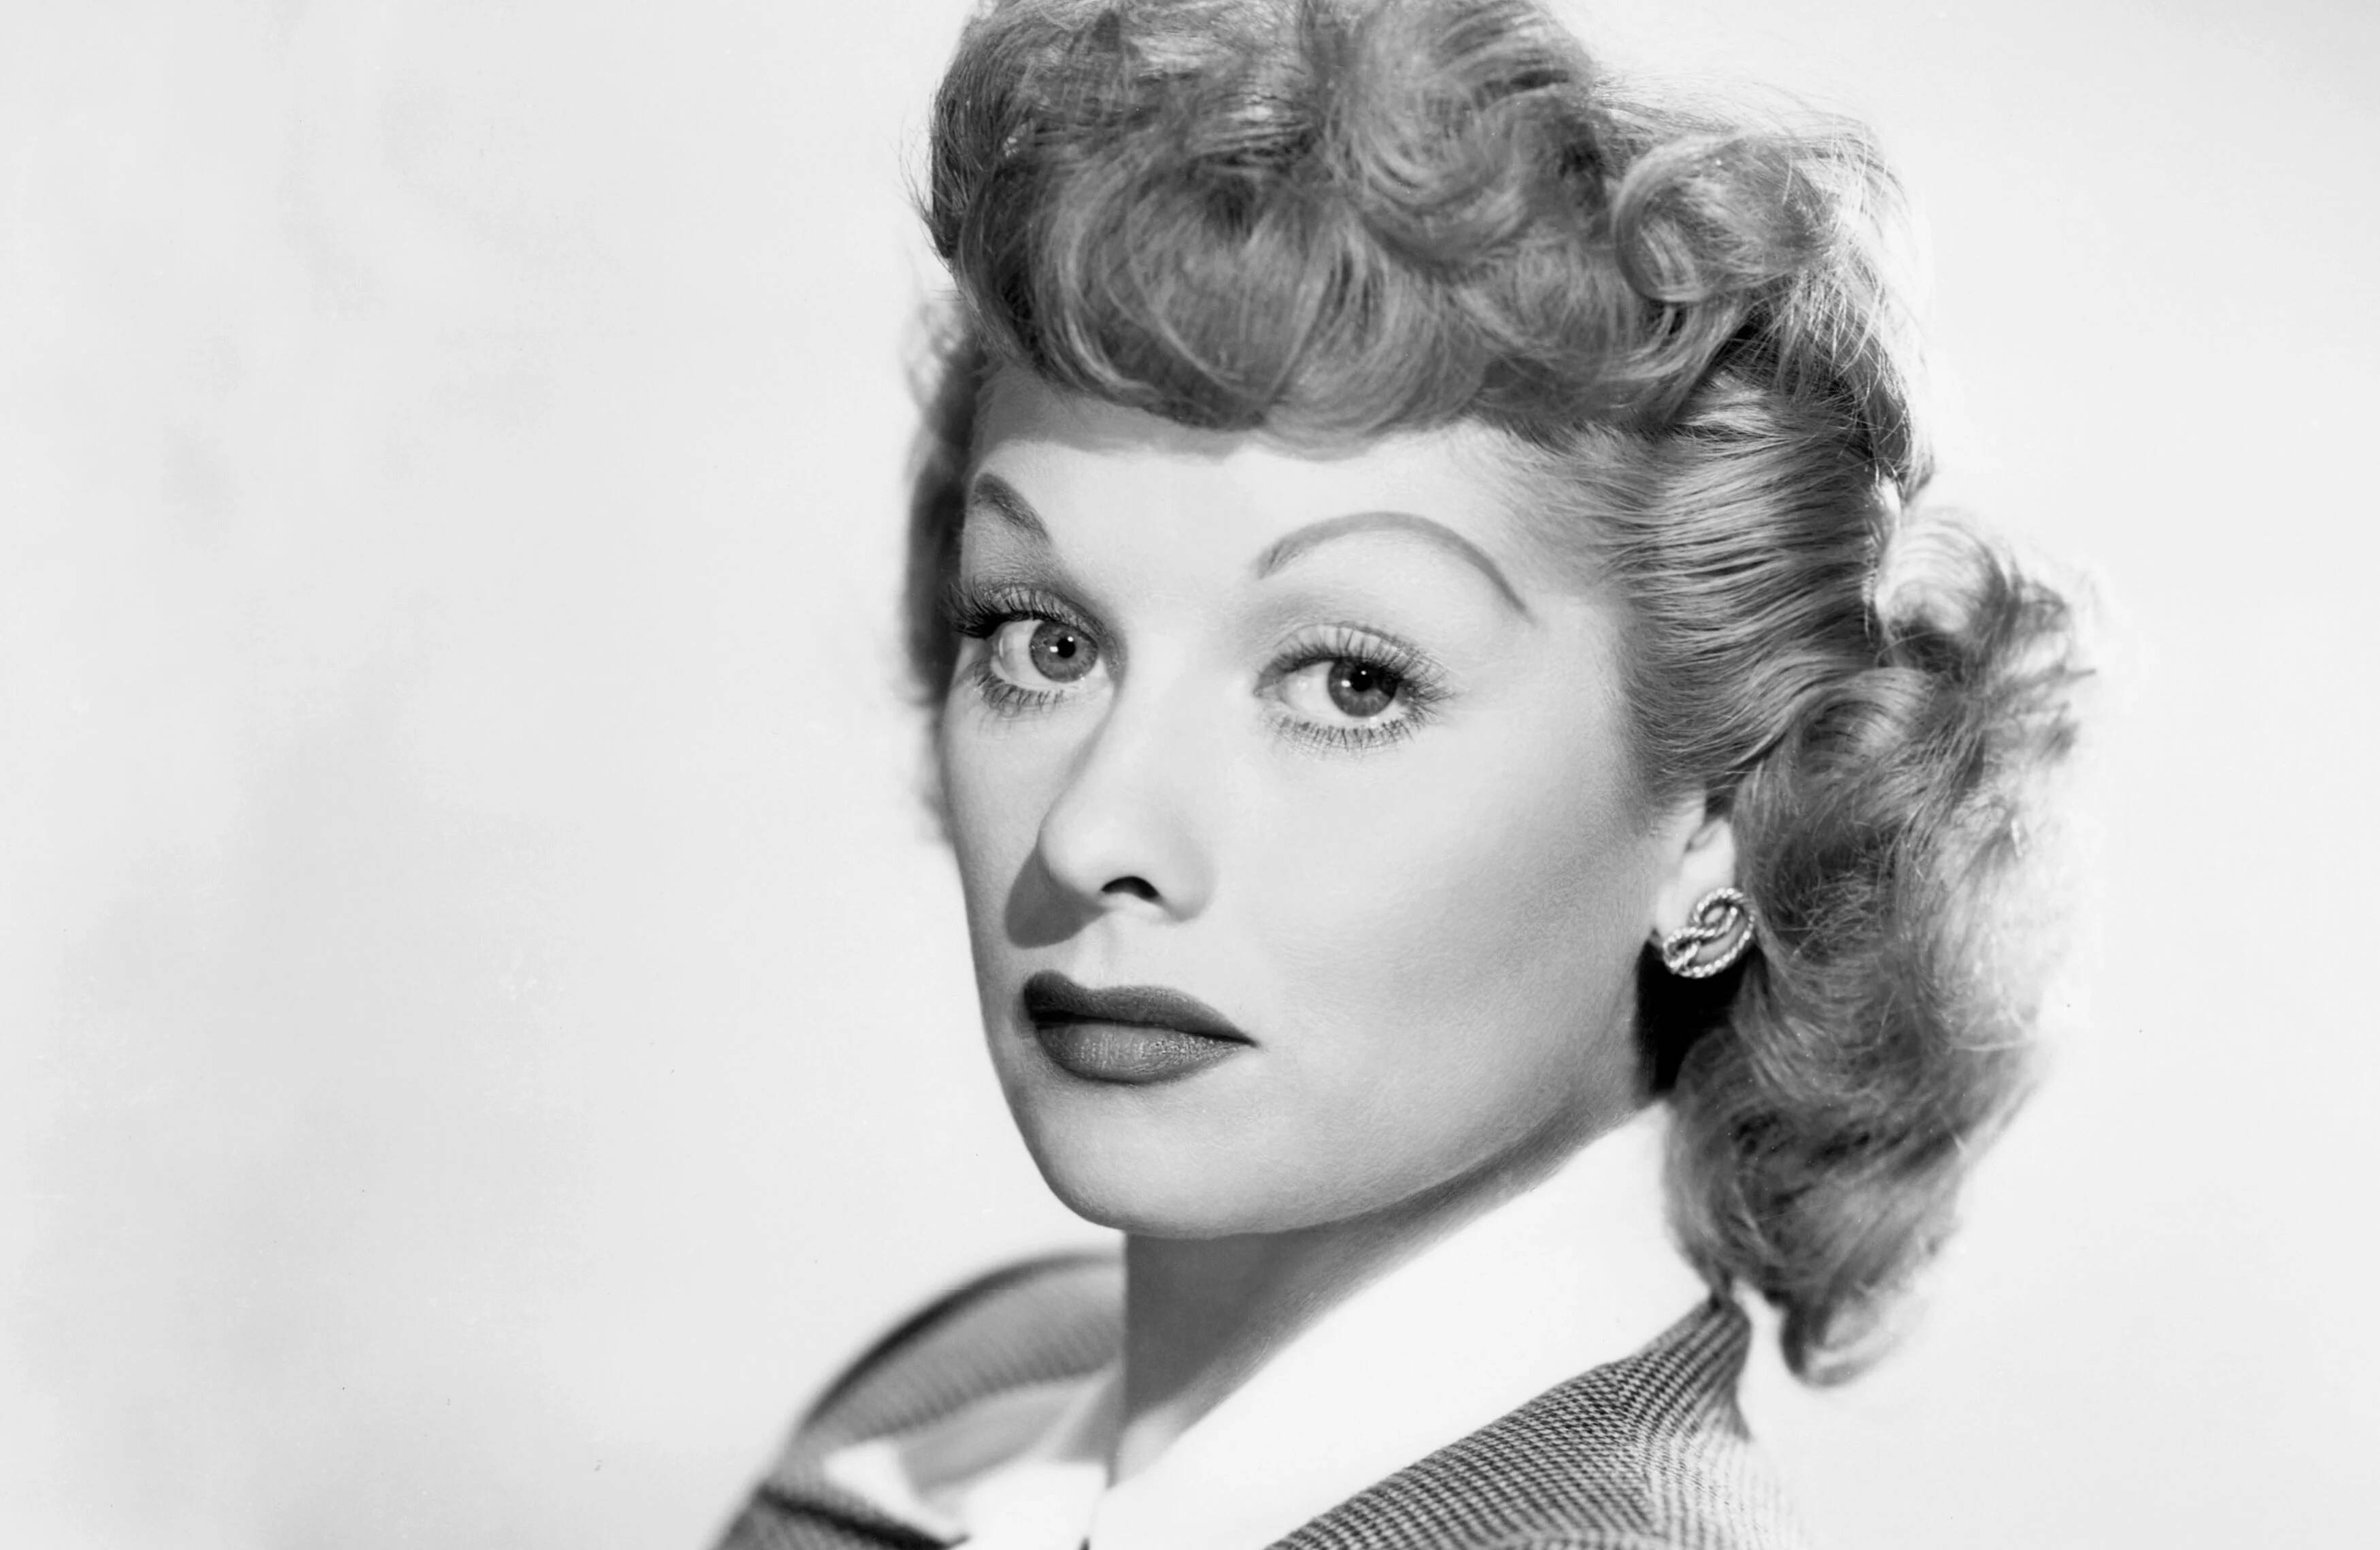 Who Played Lucille Ball In The Made-for-Television Movie